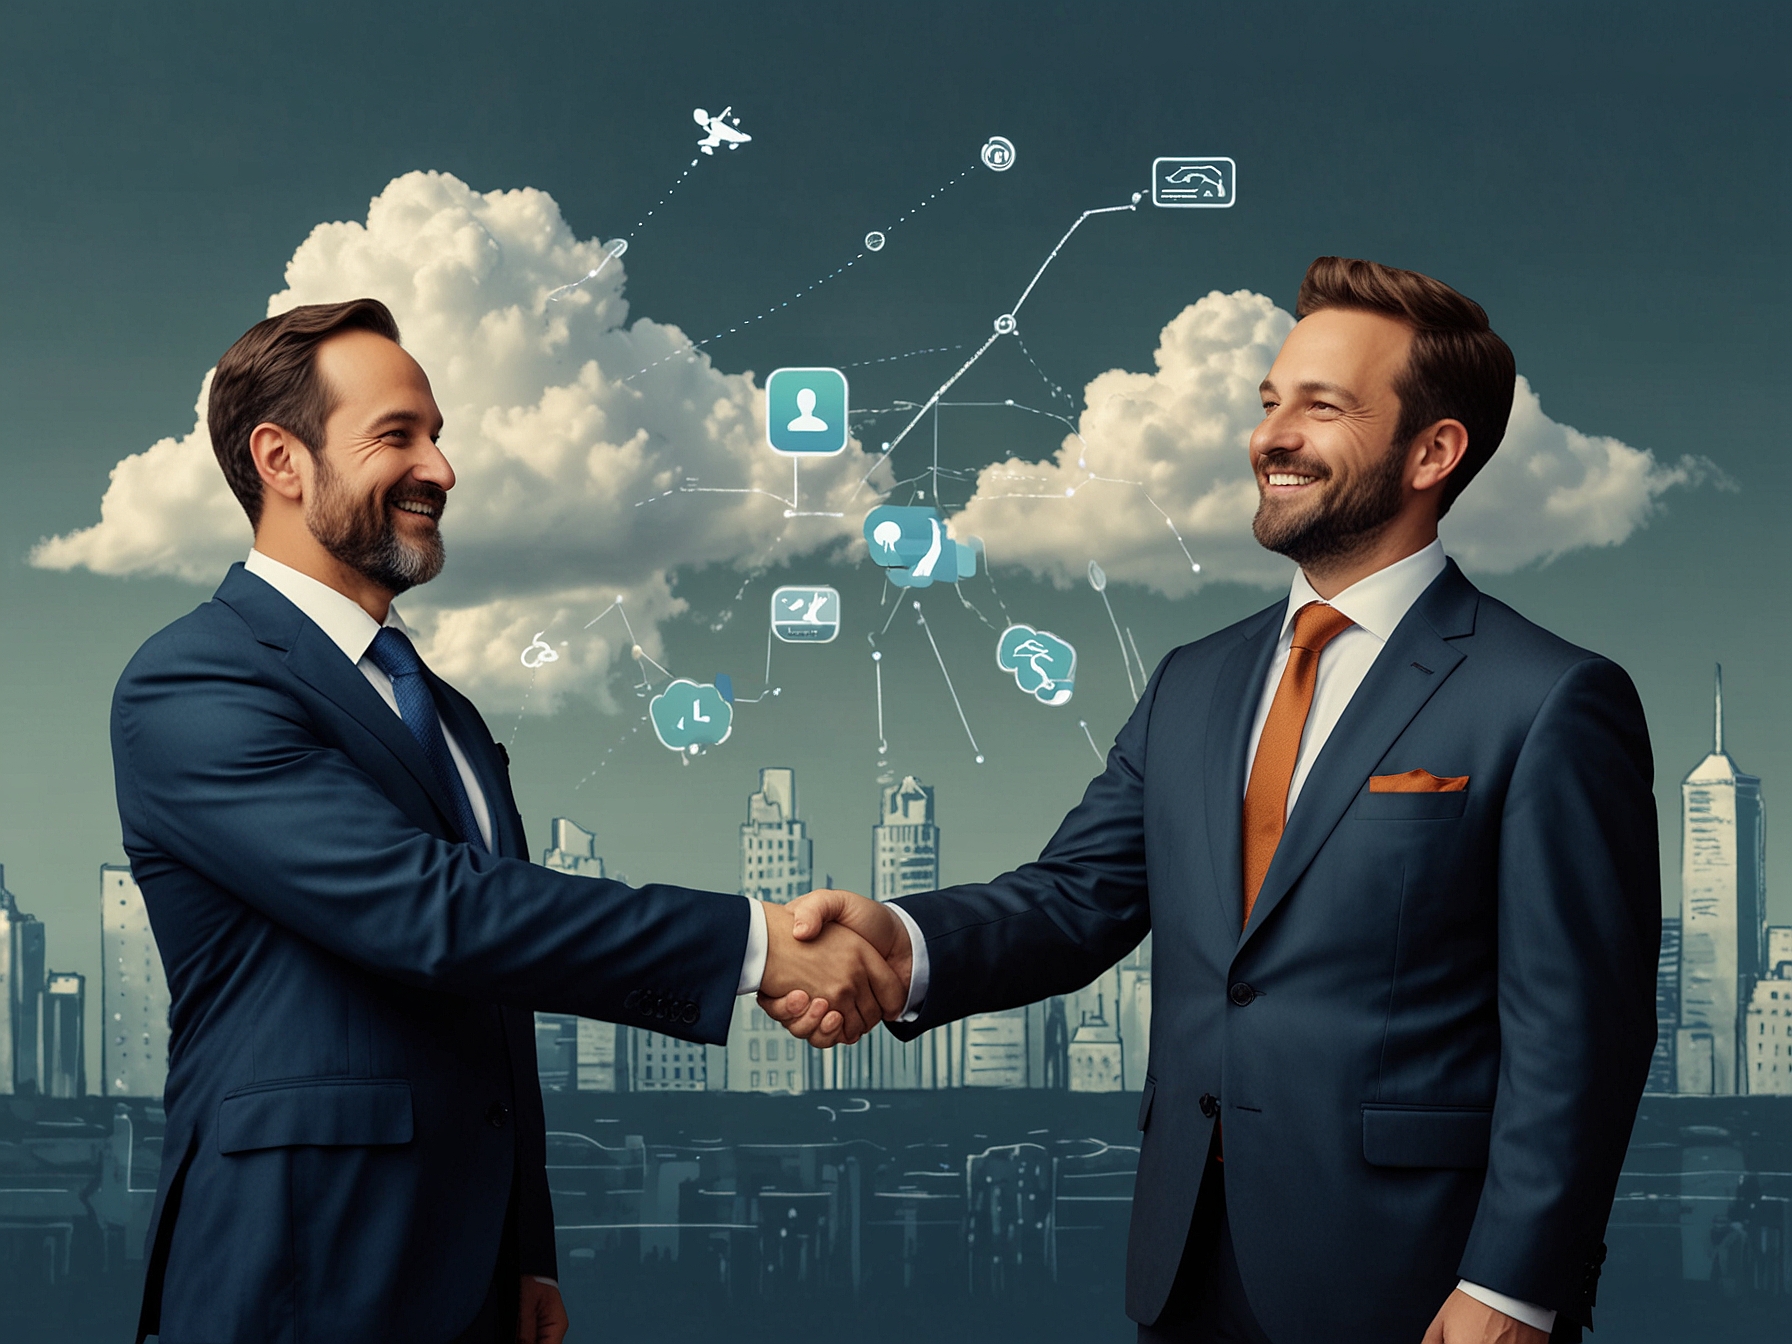 Illustration of Whale Cloud and Ant International executives shaking hands in front of a backdrop showing e-wallet and super app icons, symbolizing the strategic partnership.